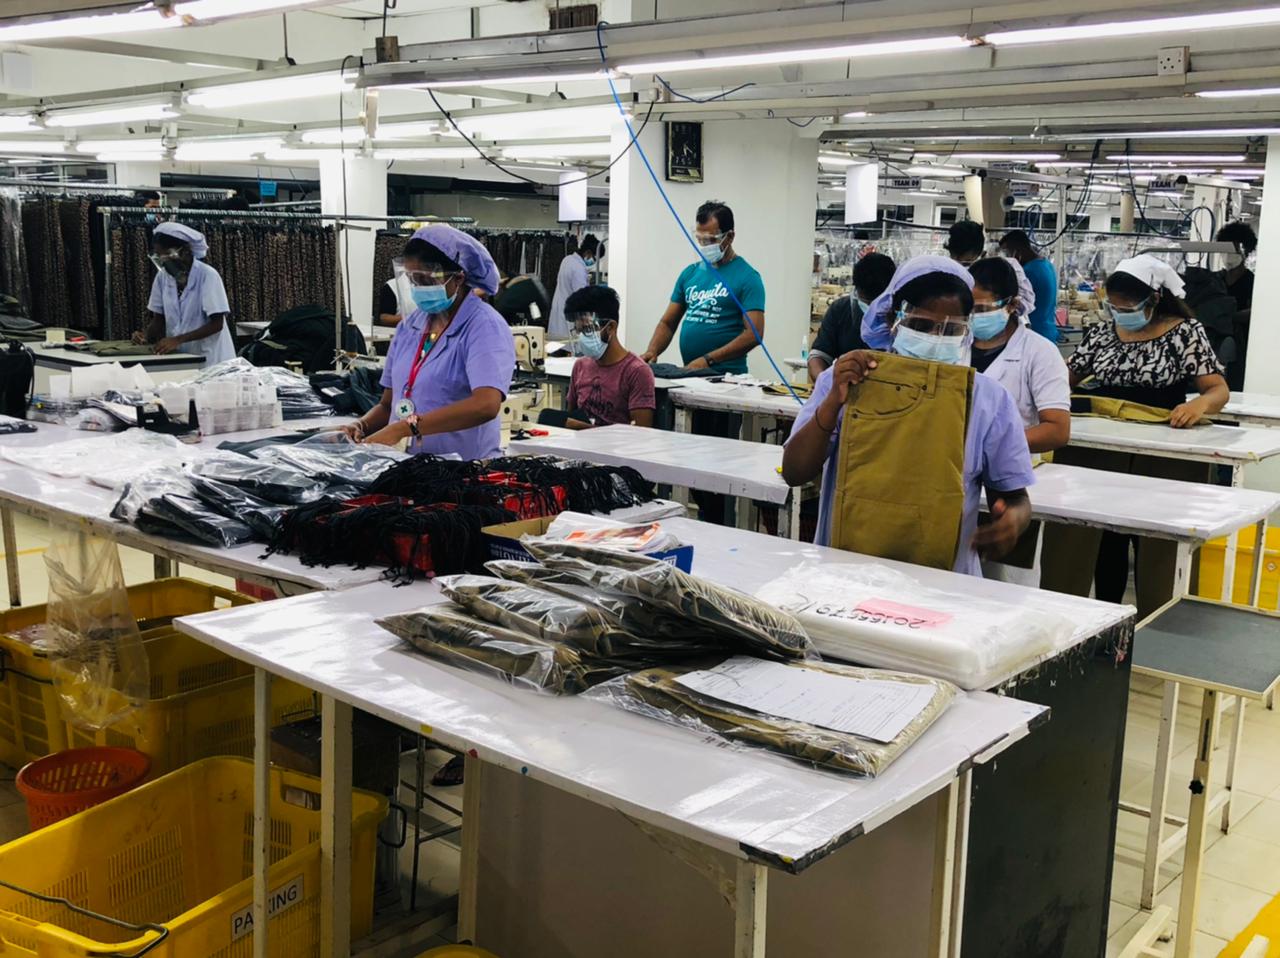 350,000 people are directly employed and a further 700,000 are indirectly employed in the apparel sector. © Joint Apparel Association Forum